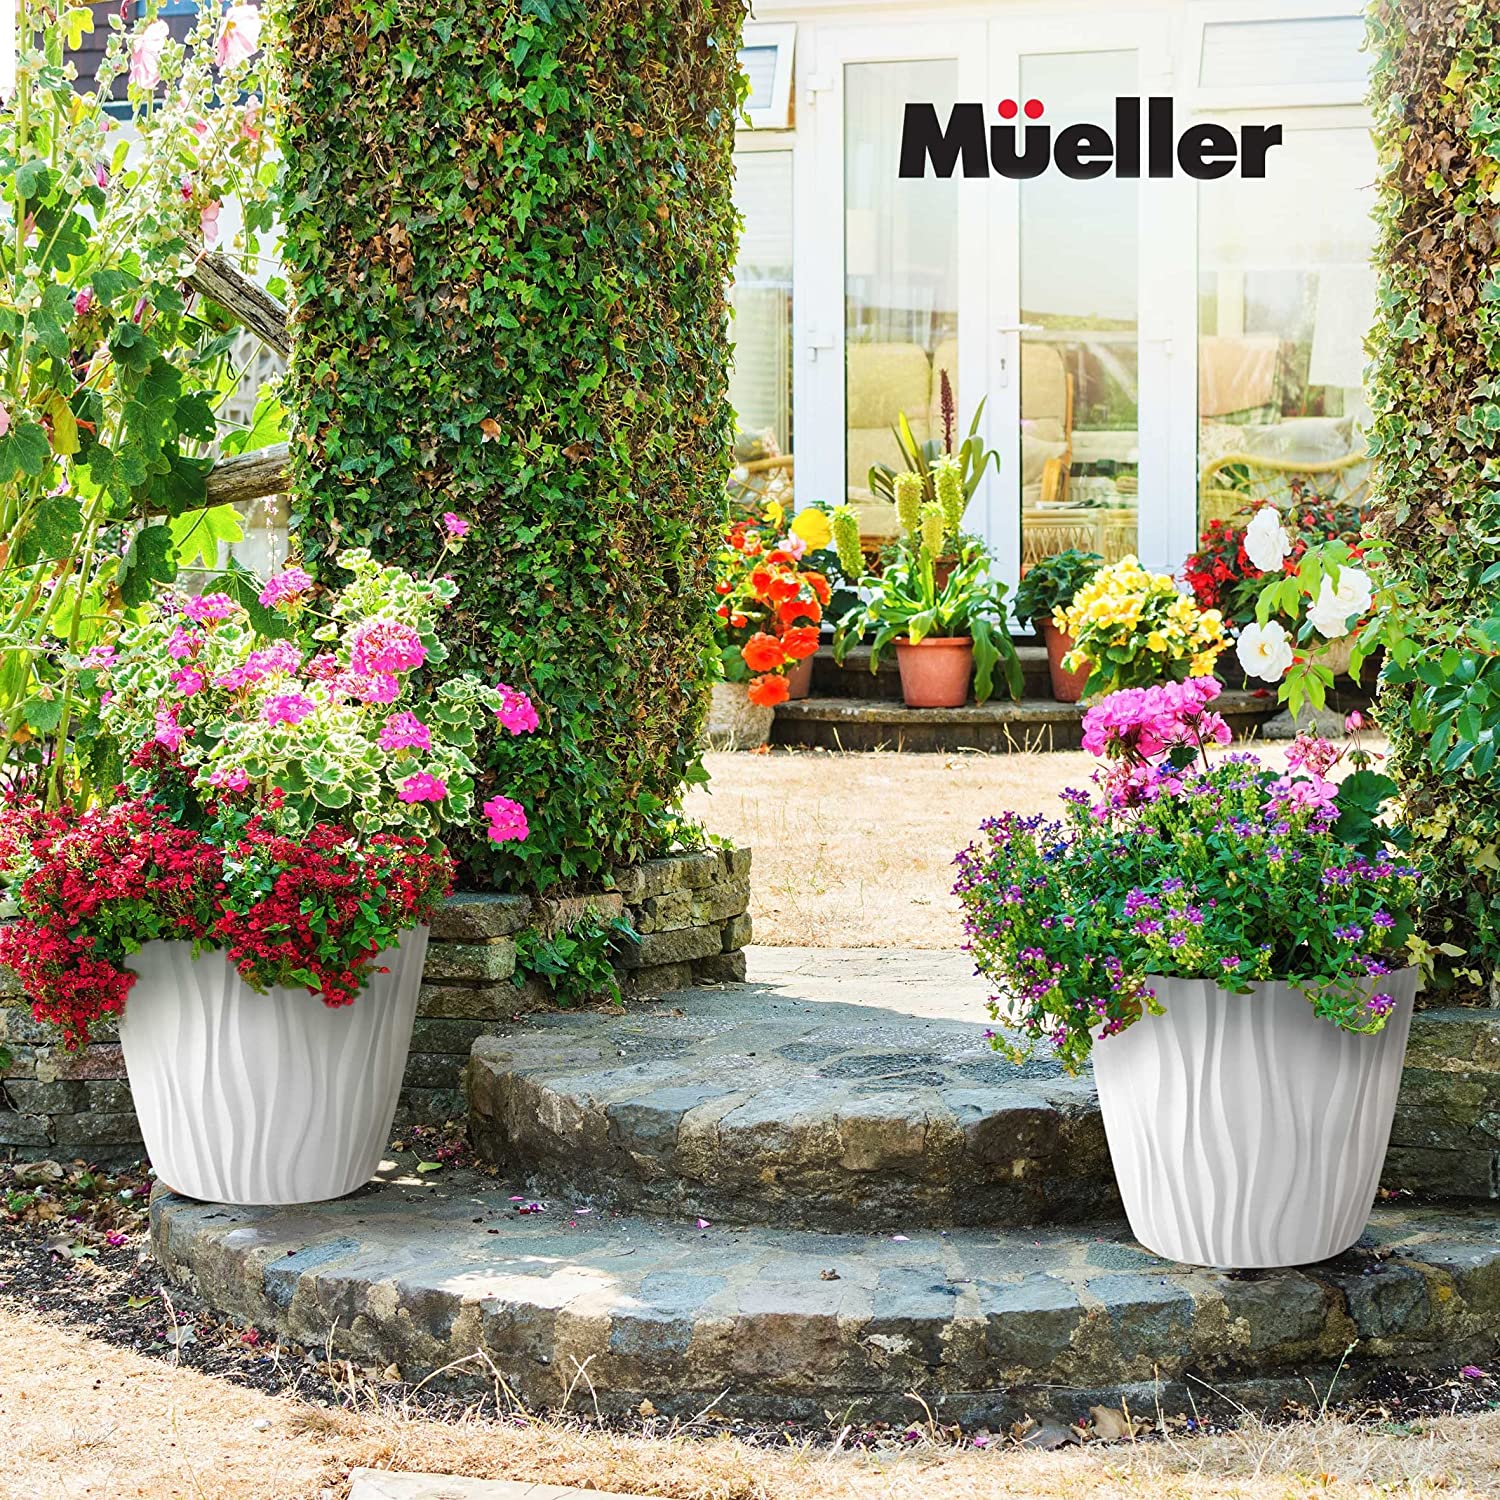 muellerhome_decorative-plant-and-flower-pots-extra-large-4-piece-white-set-6